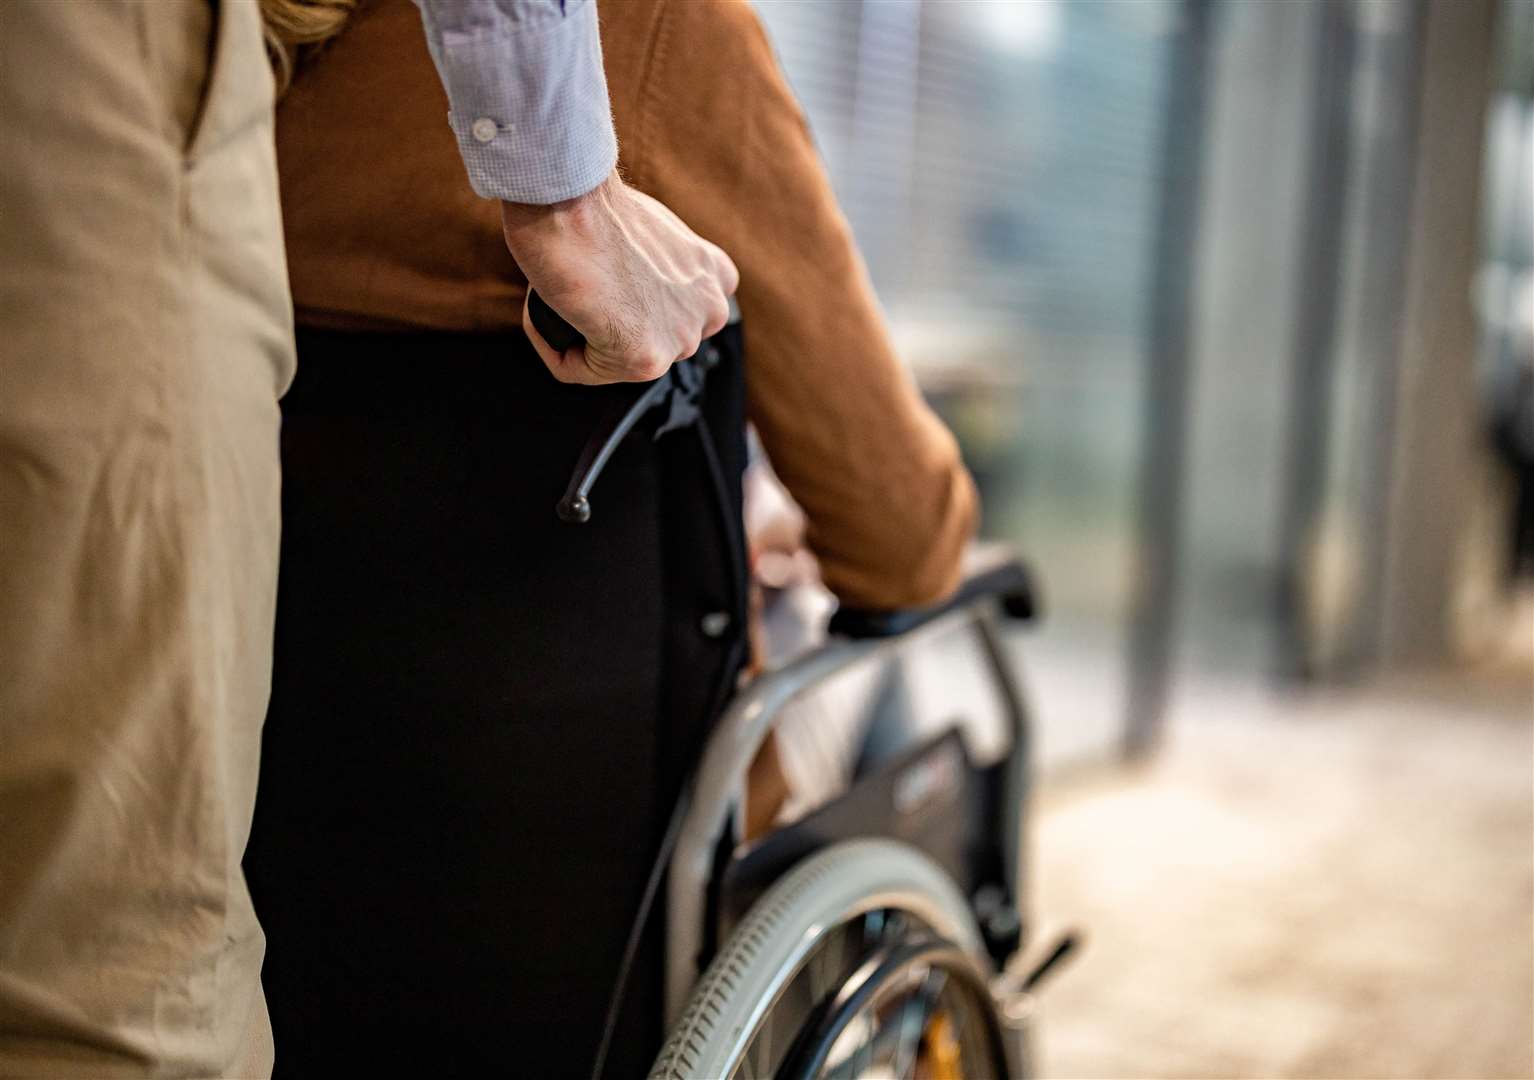 Thousands of people living with disabilities could be affected. Stock image